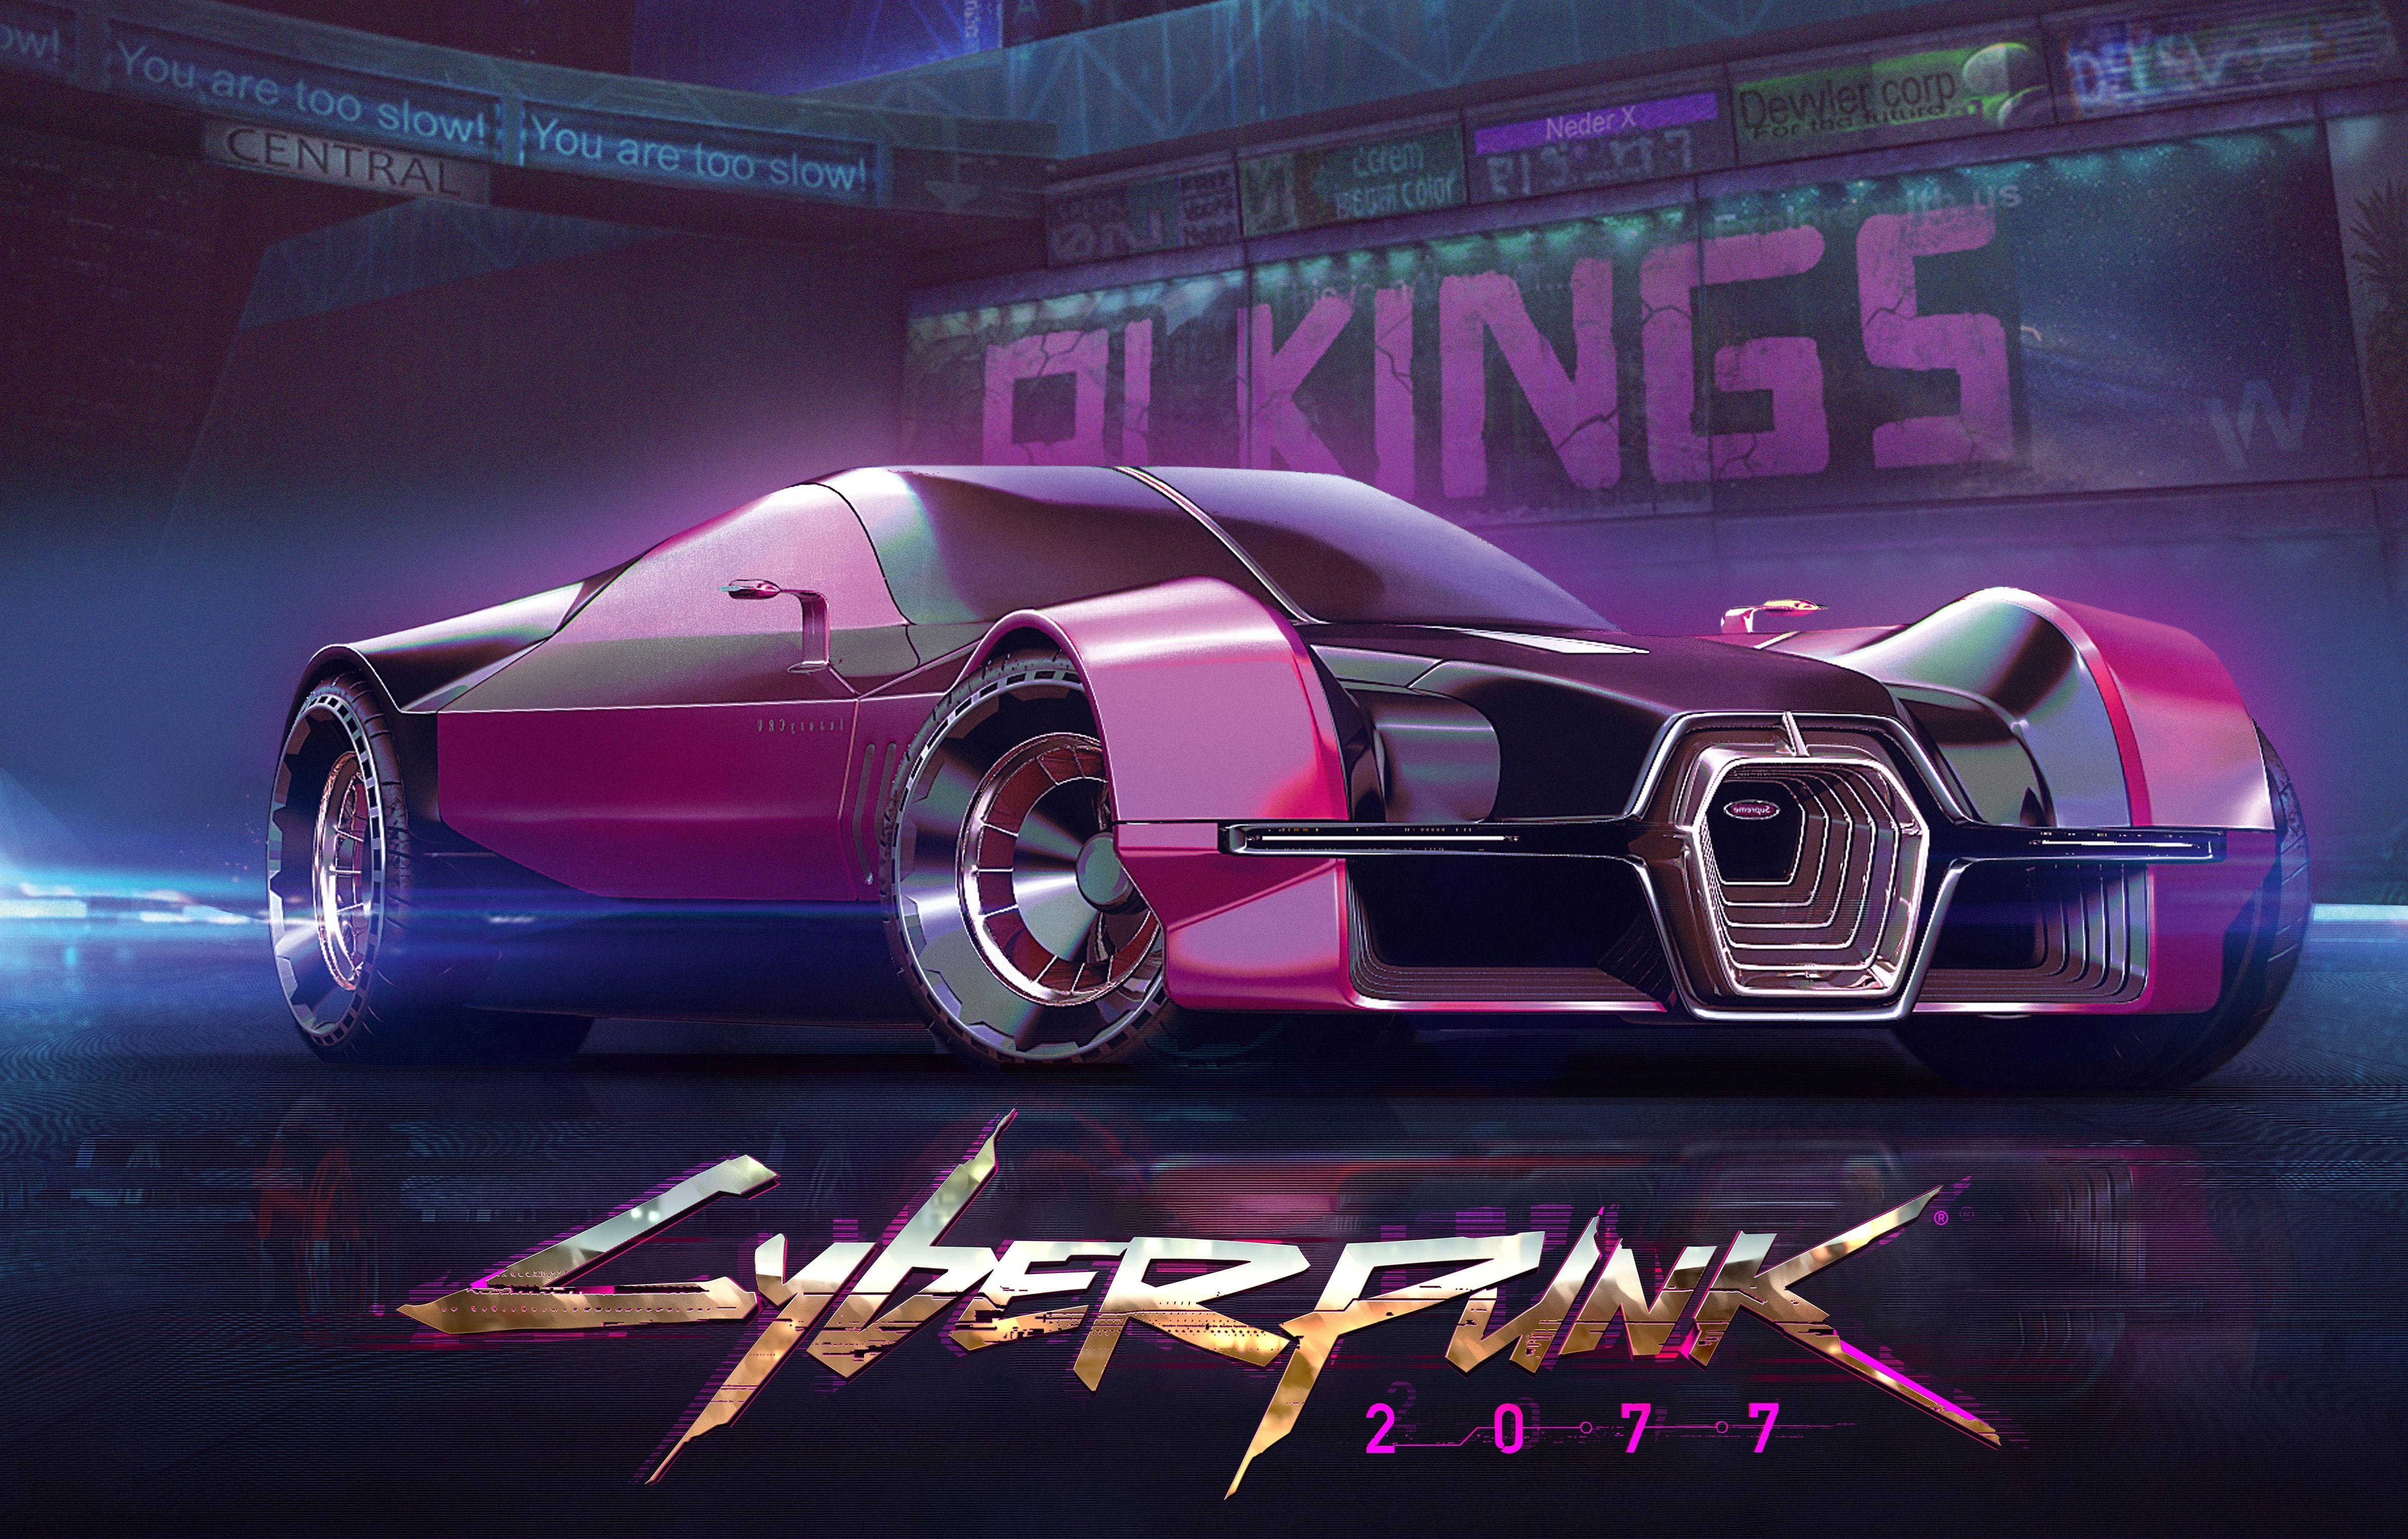 Cyberpunk Car wallpapers collection